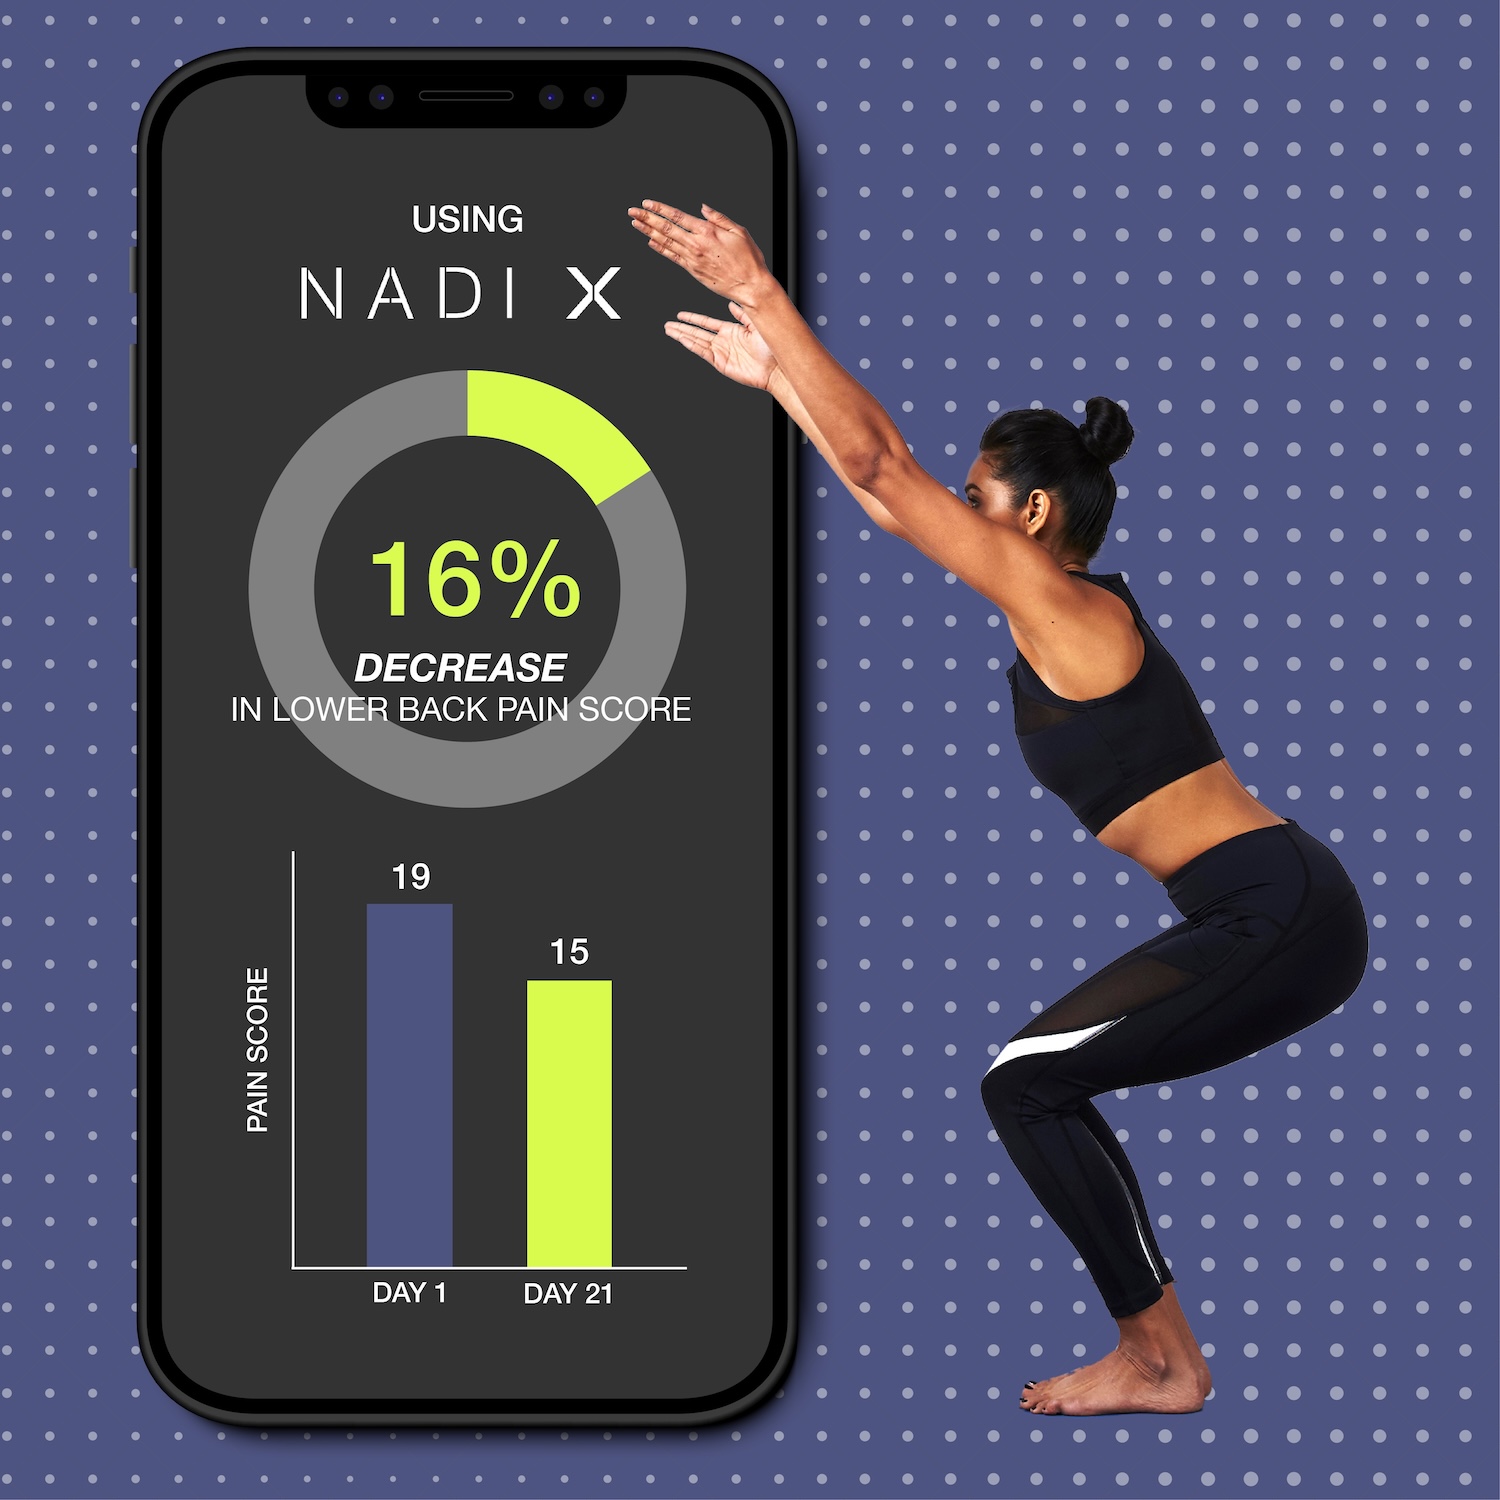 Billie Whitehouse is now extending the capability of Nadi X technology to offer relief from Lower Back Pain with studies already under way. © Billie Whitehouse